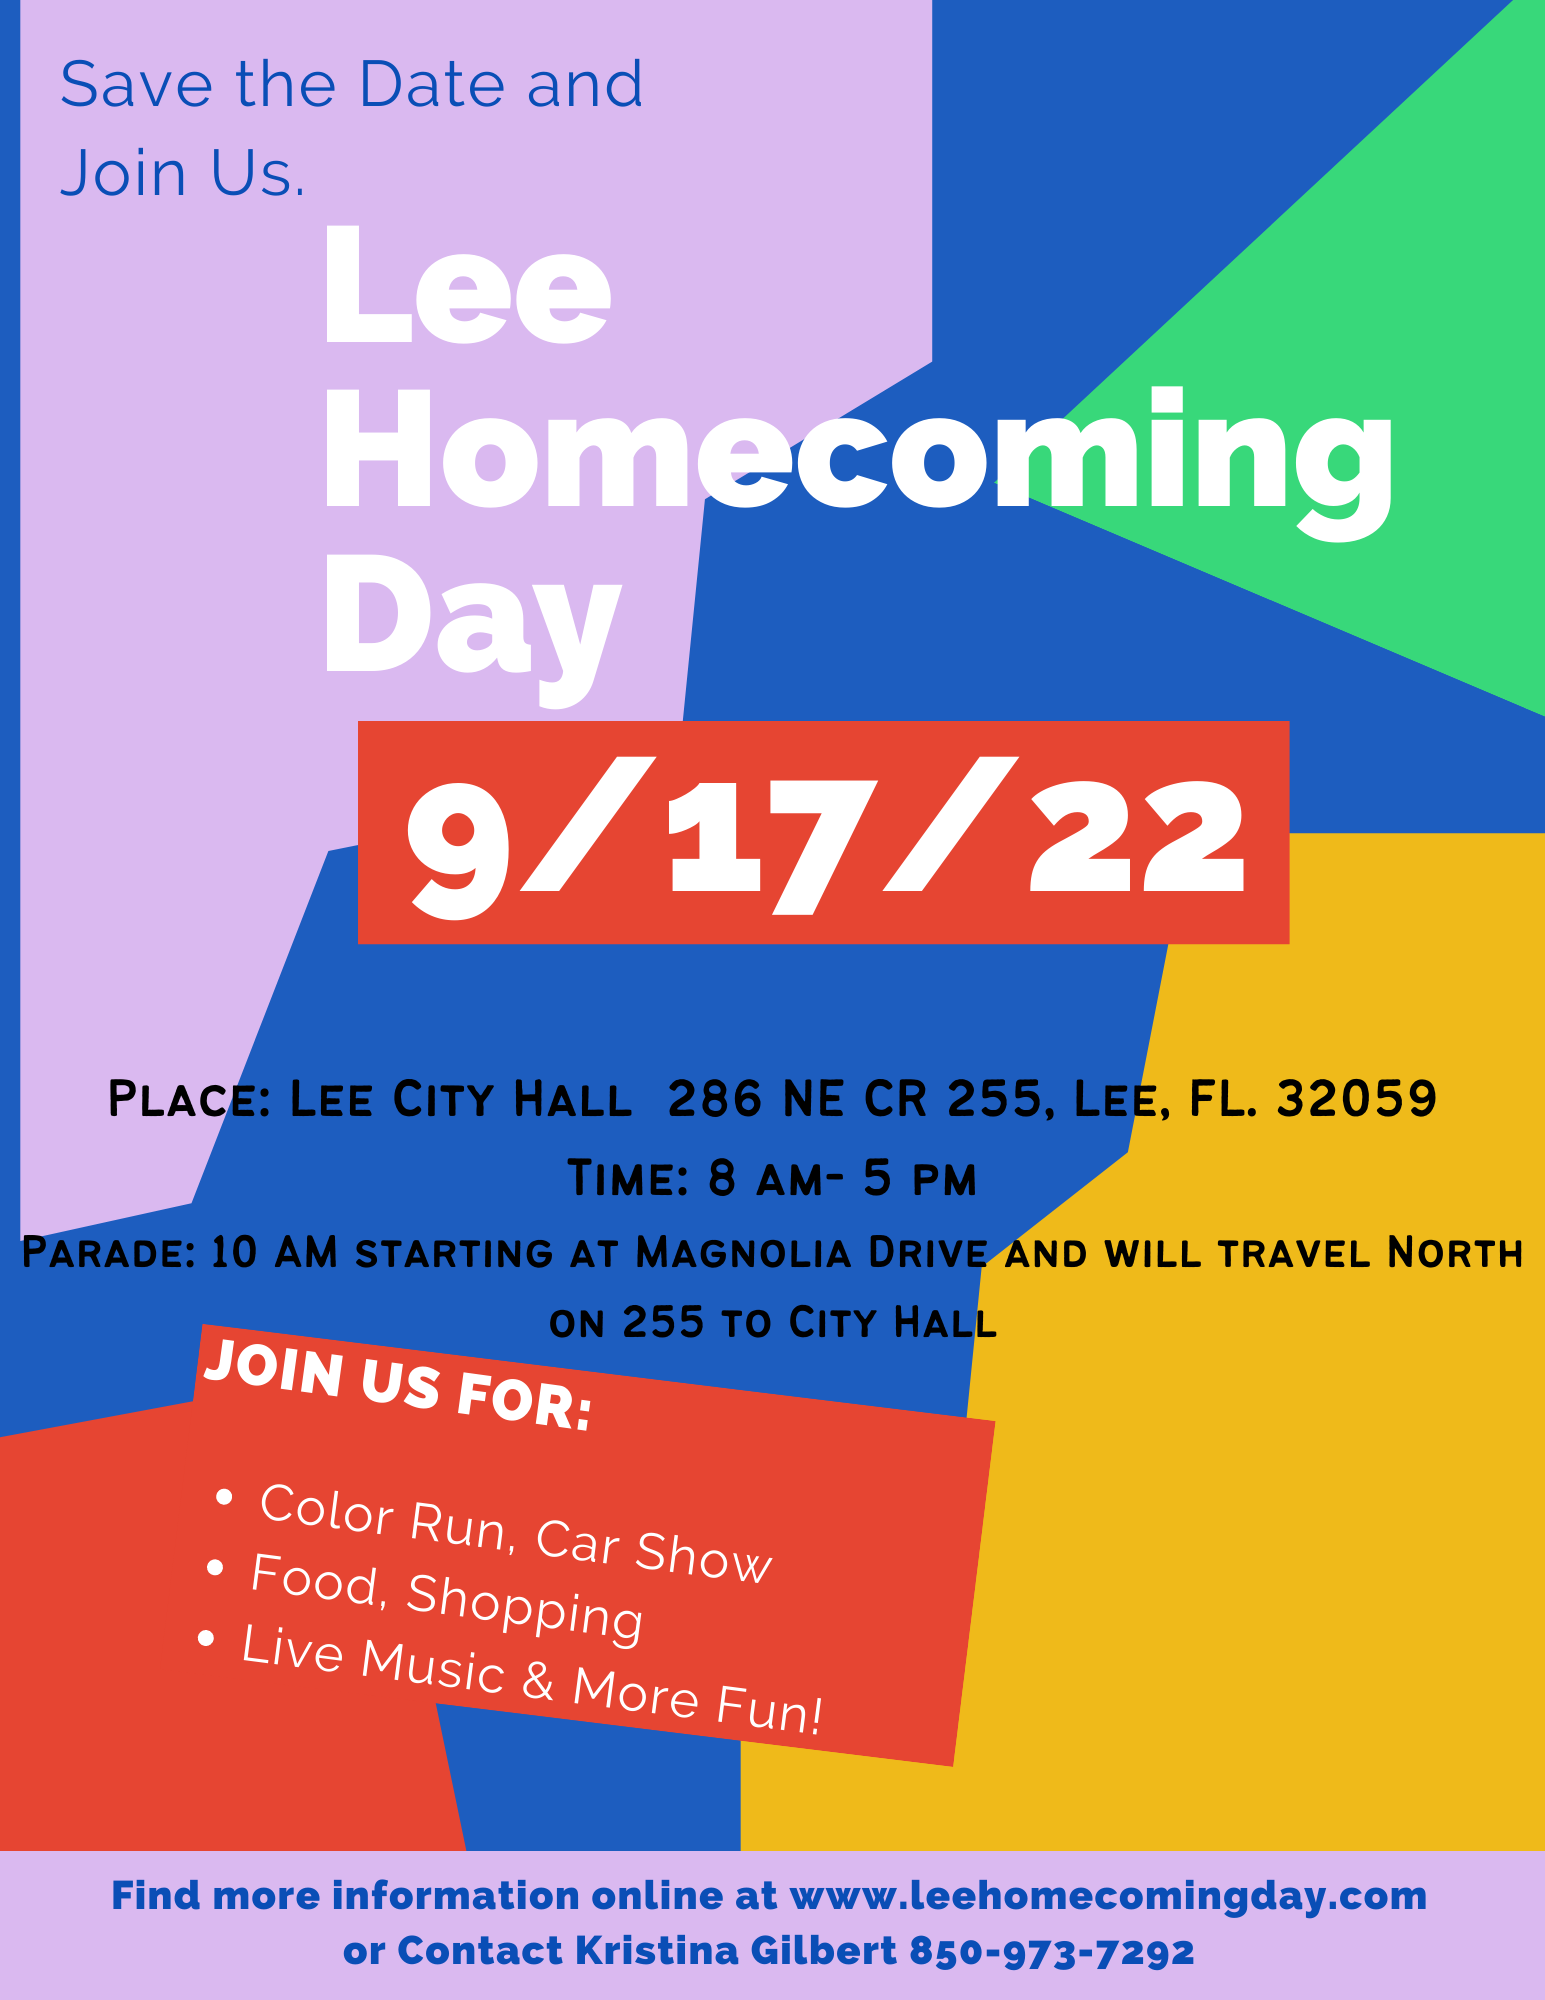 Lee Homecoming Day